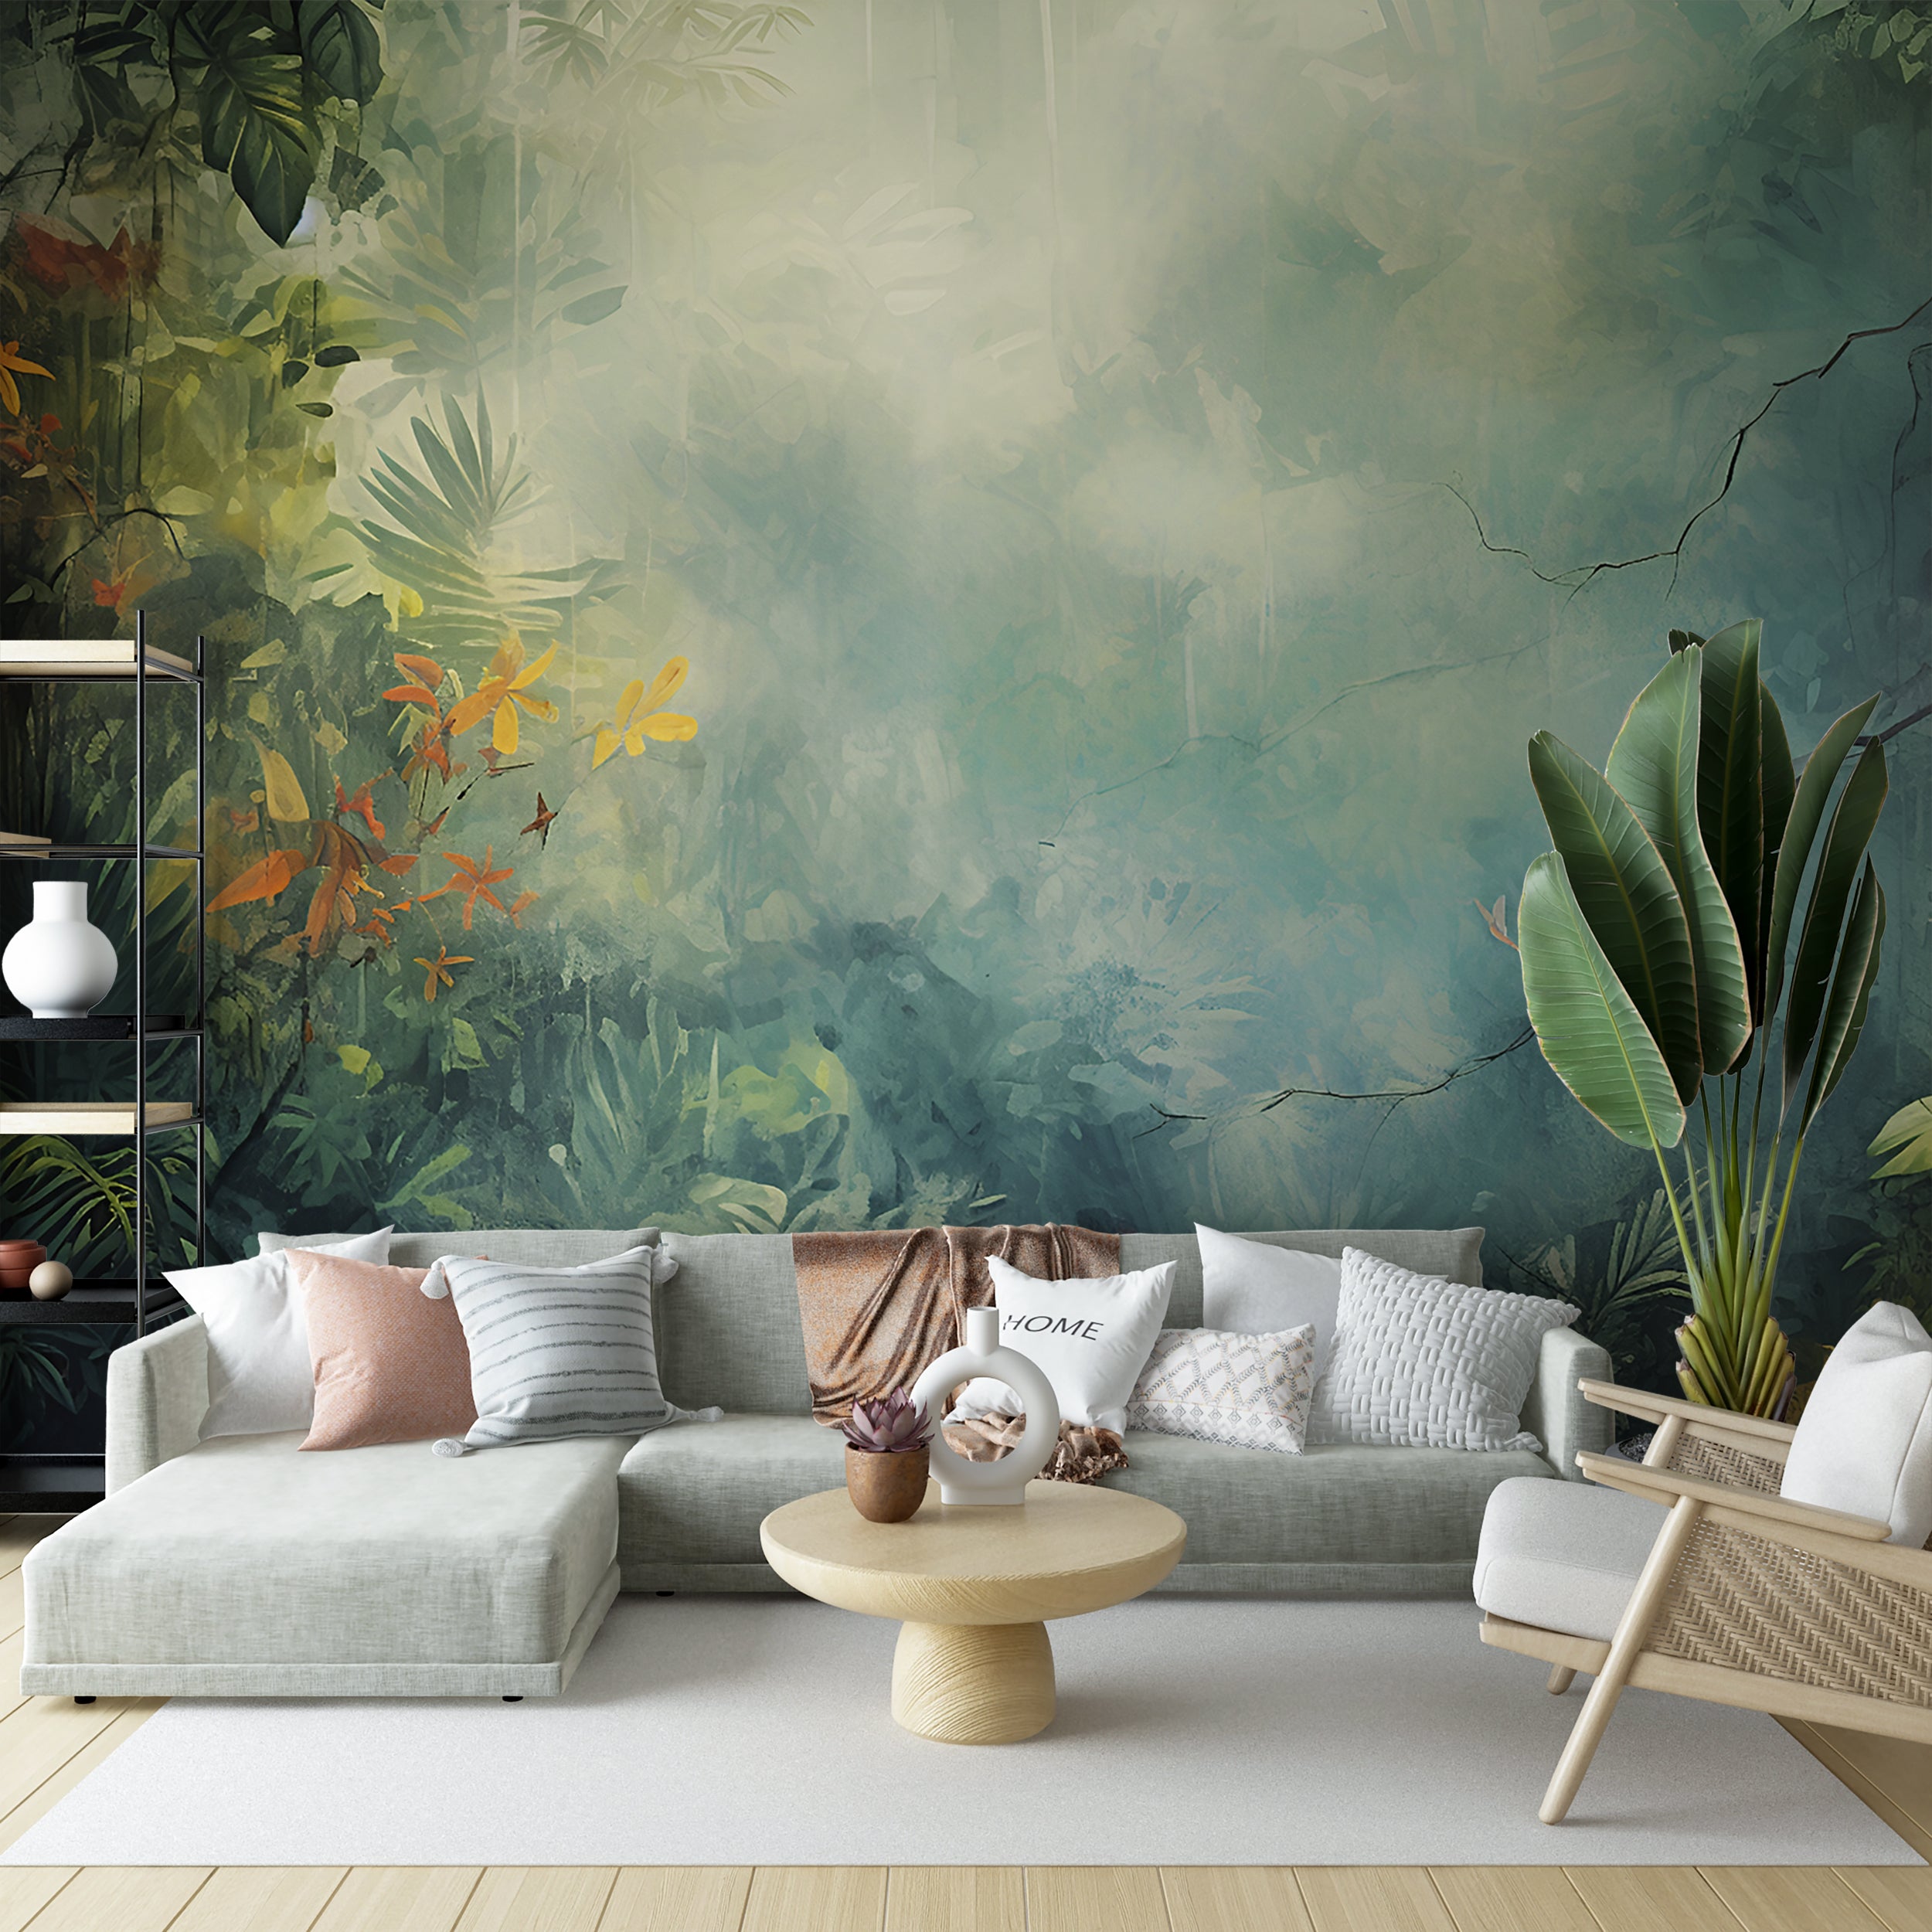 Rainforest Mural with Exotic Nature Design